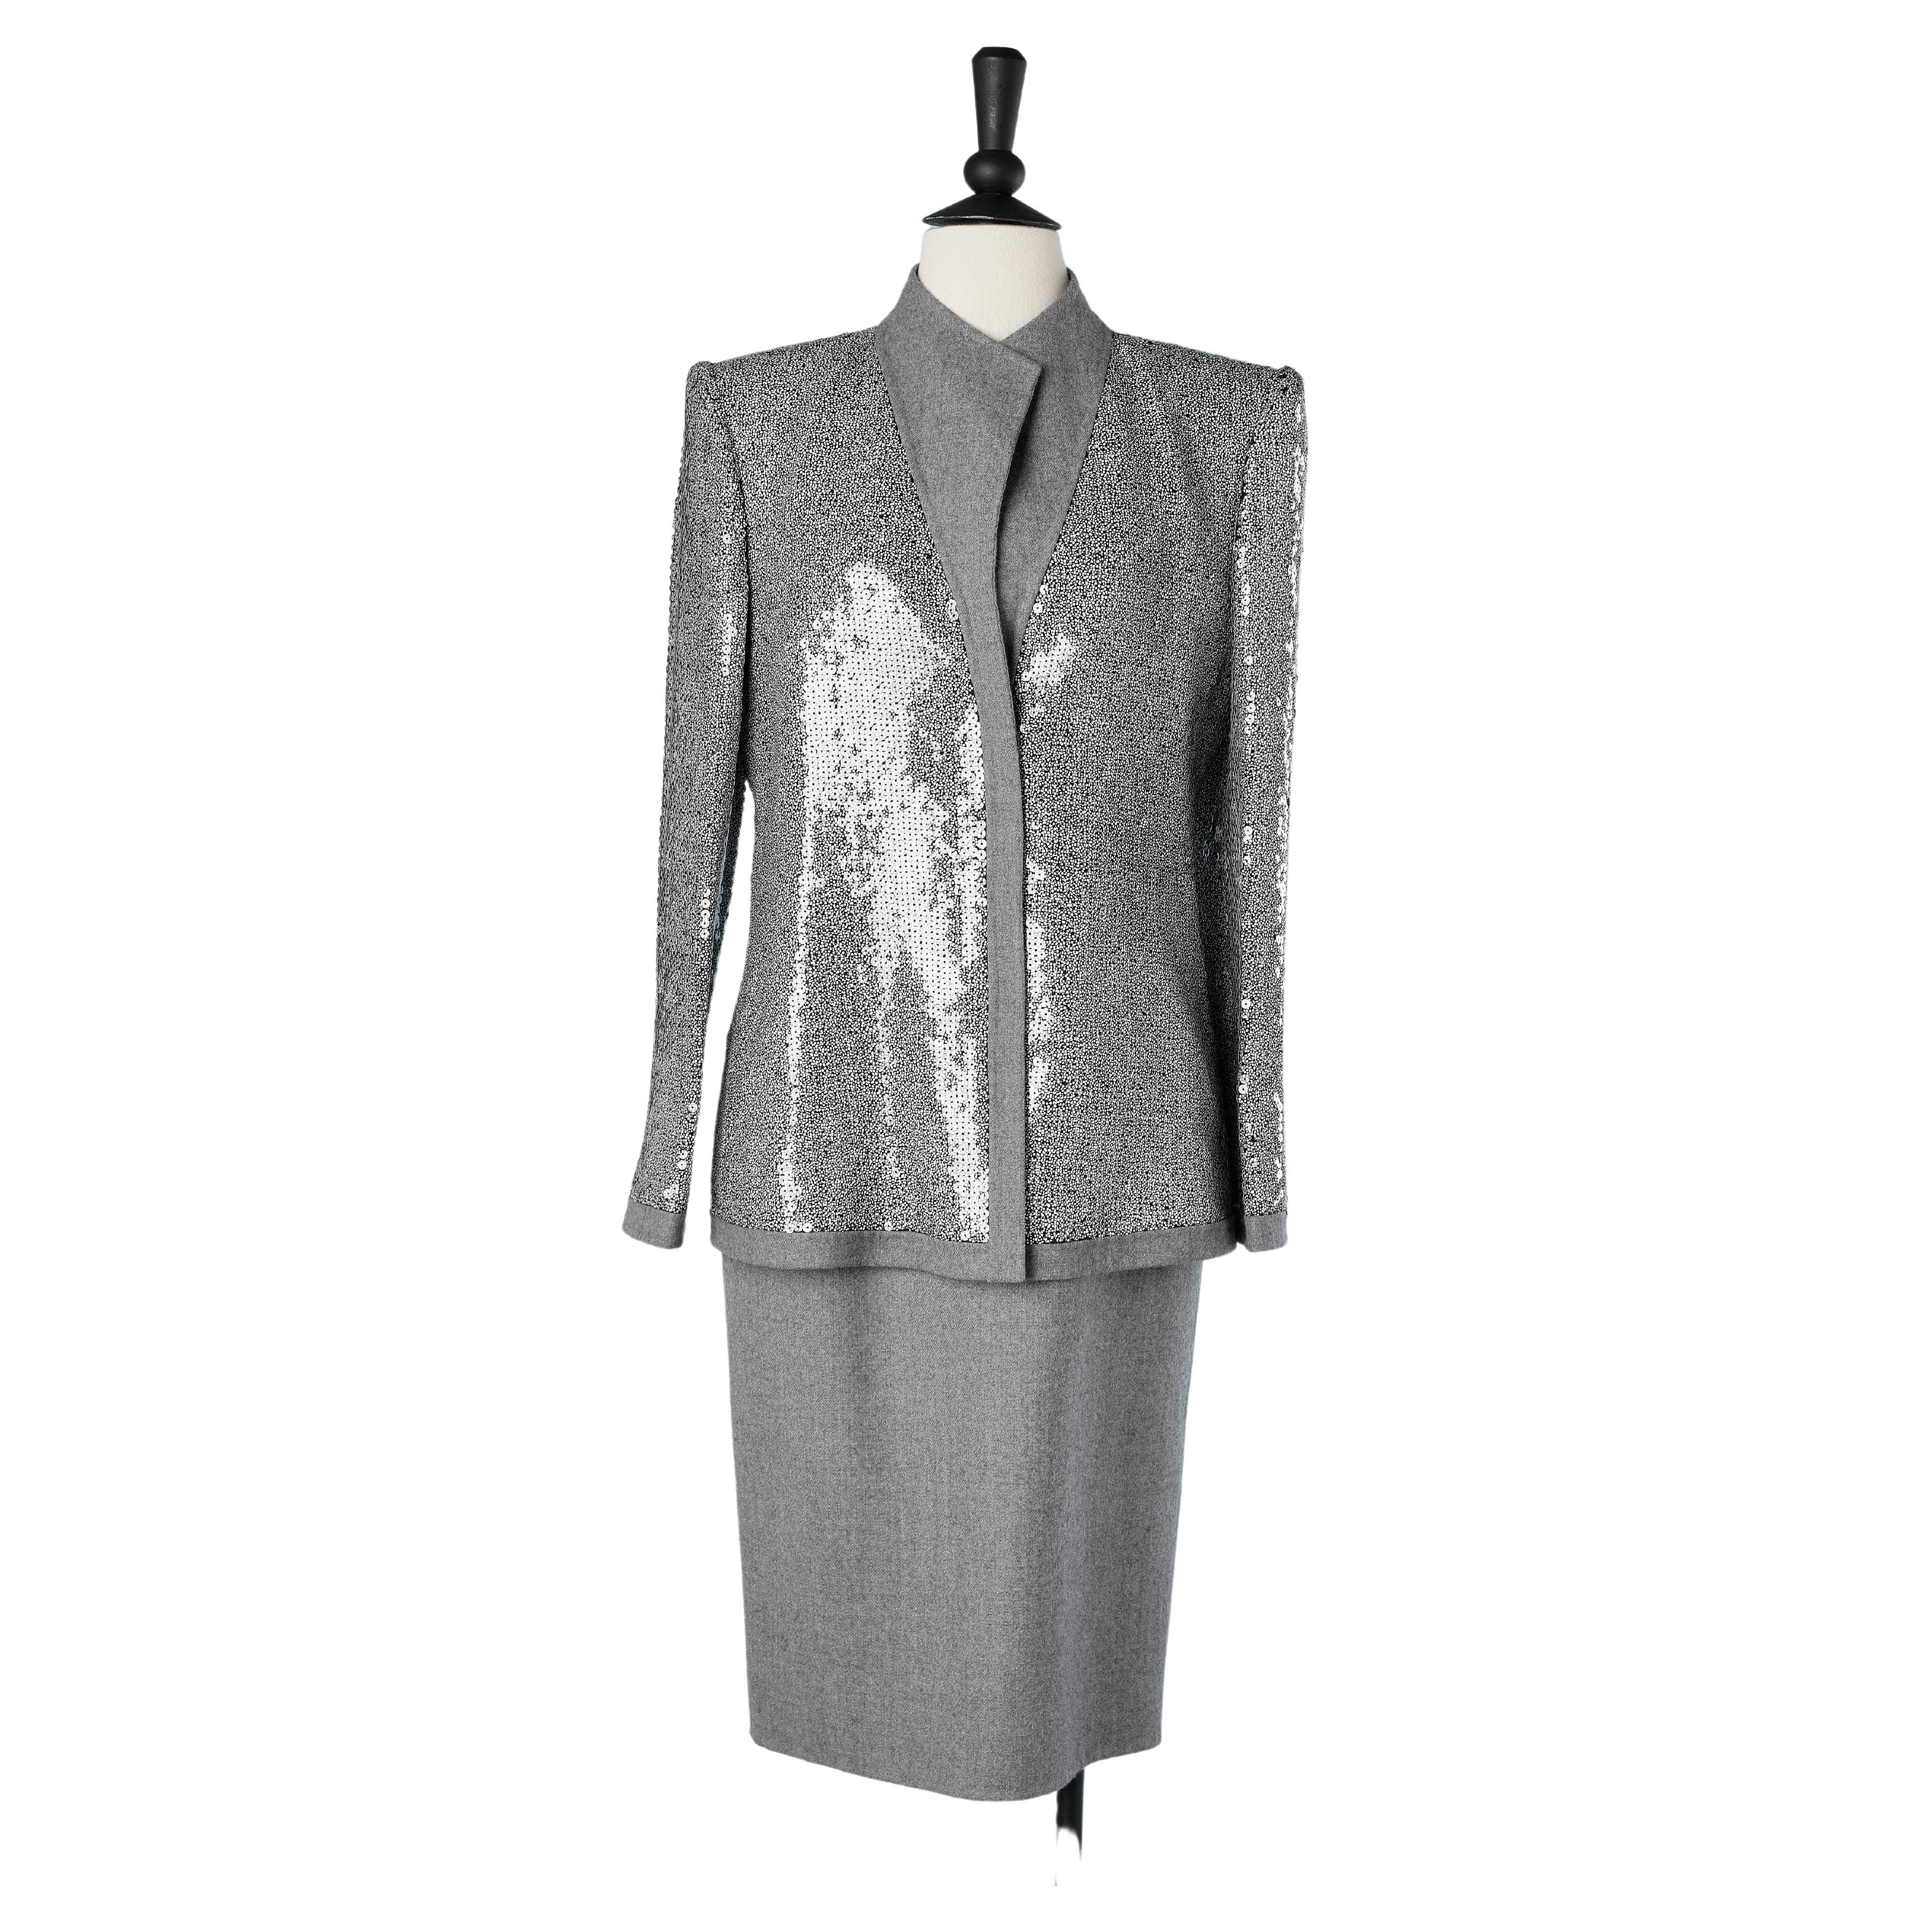 Skirt suit in grey wool and black&white sequin Numbered André Laug 